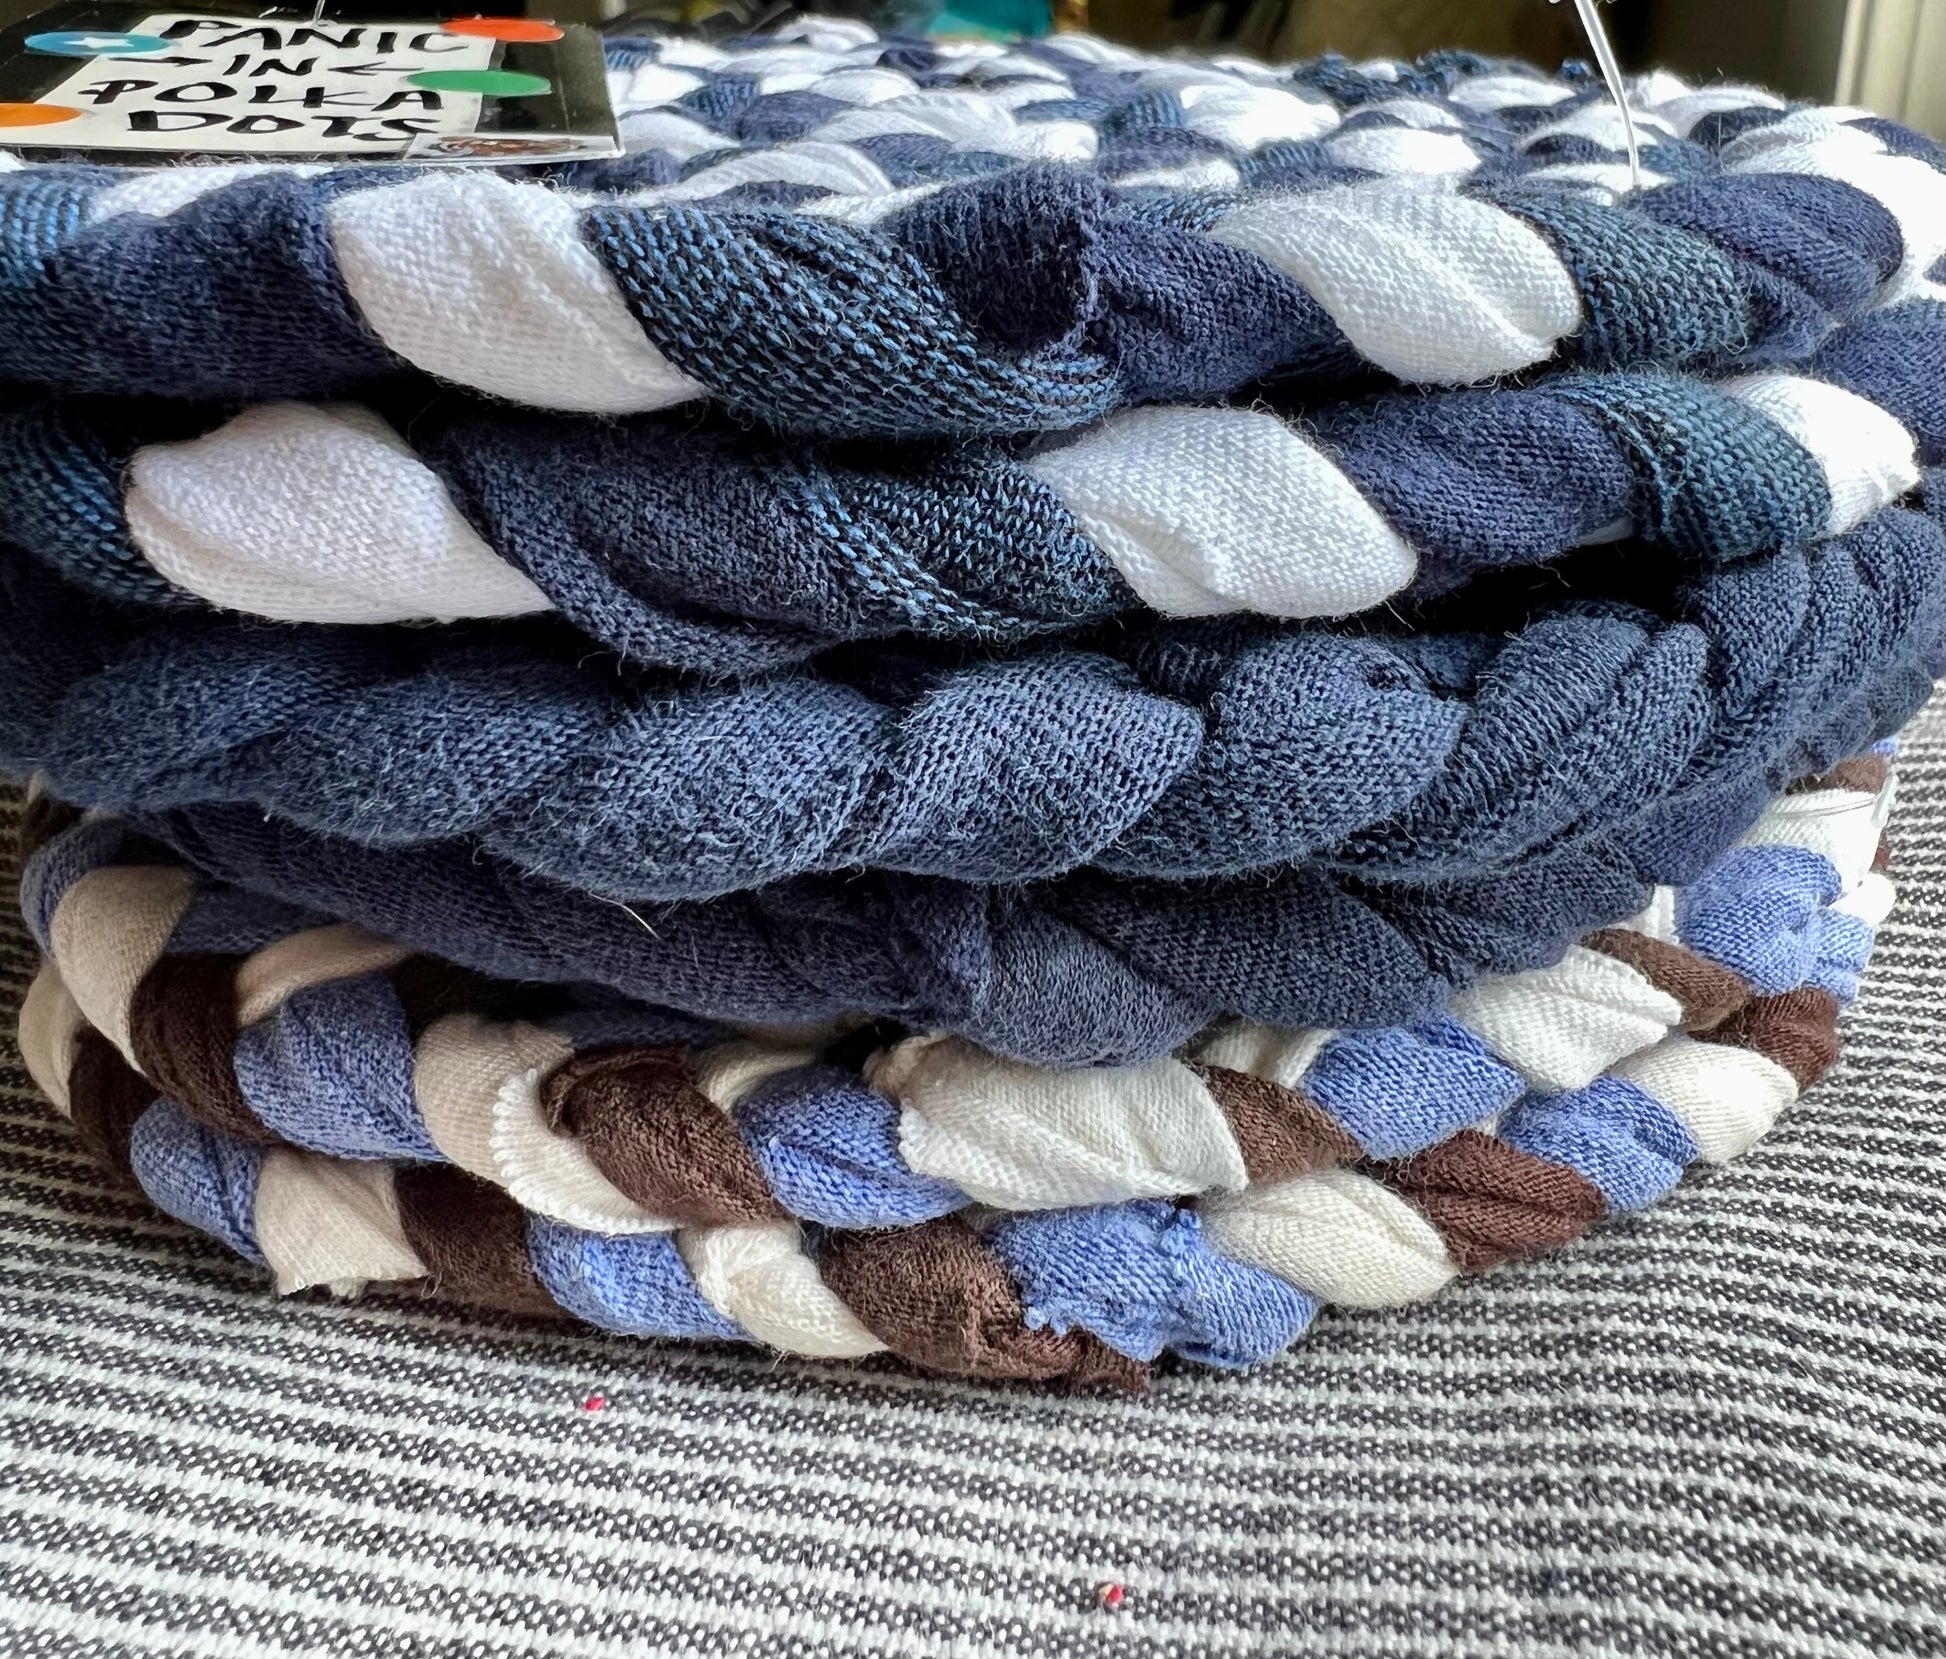 A stack of Navy, blue, and white trivets, side view.